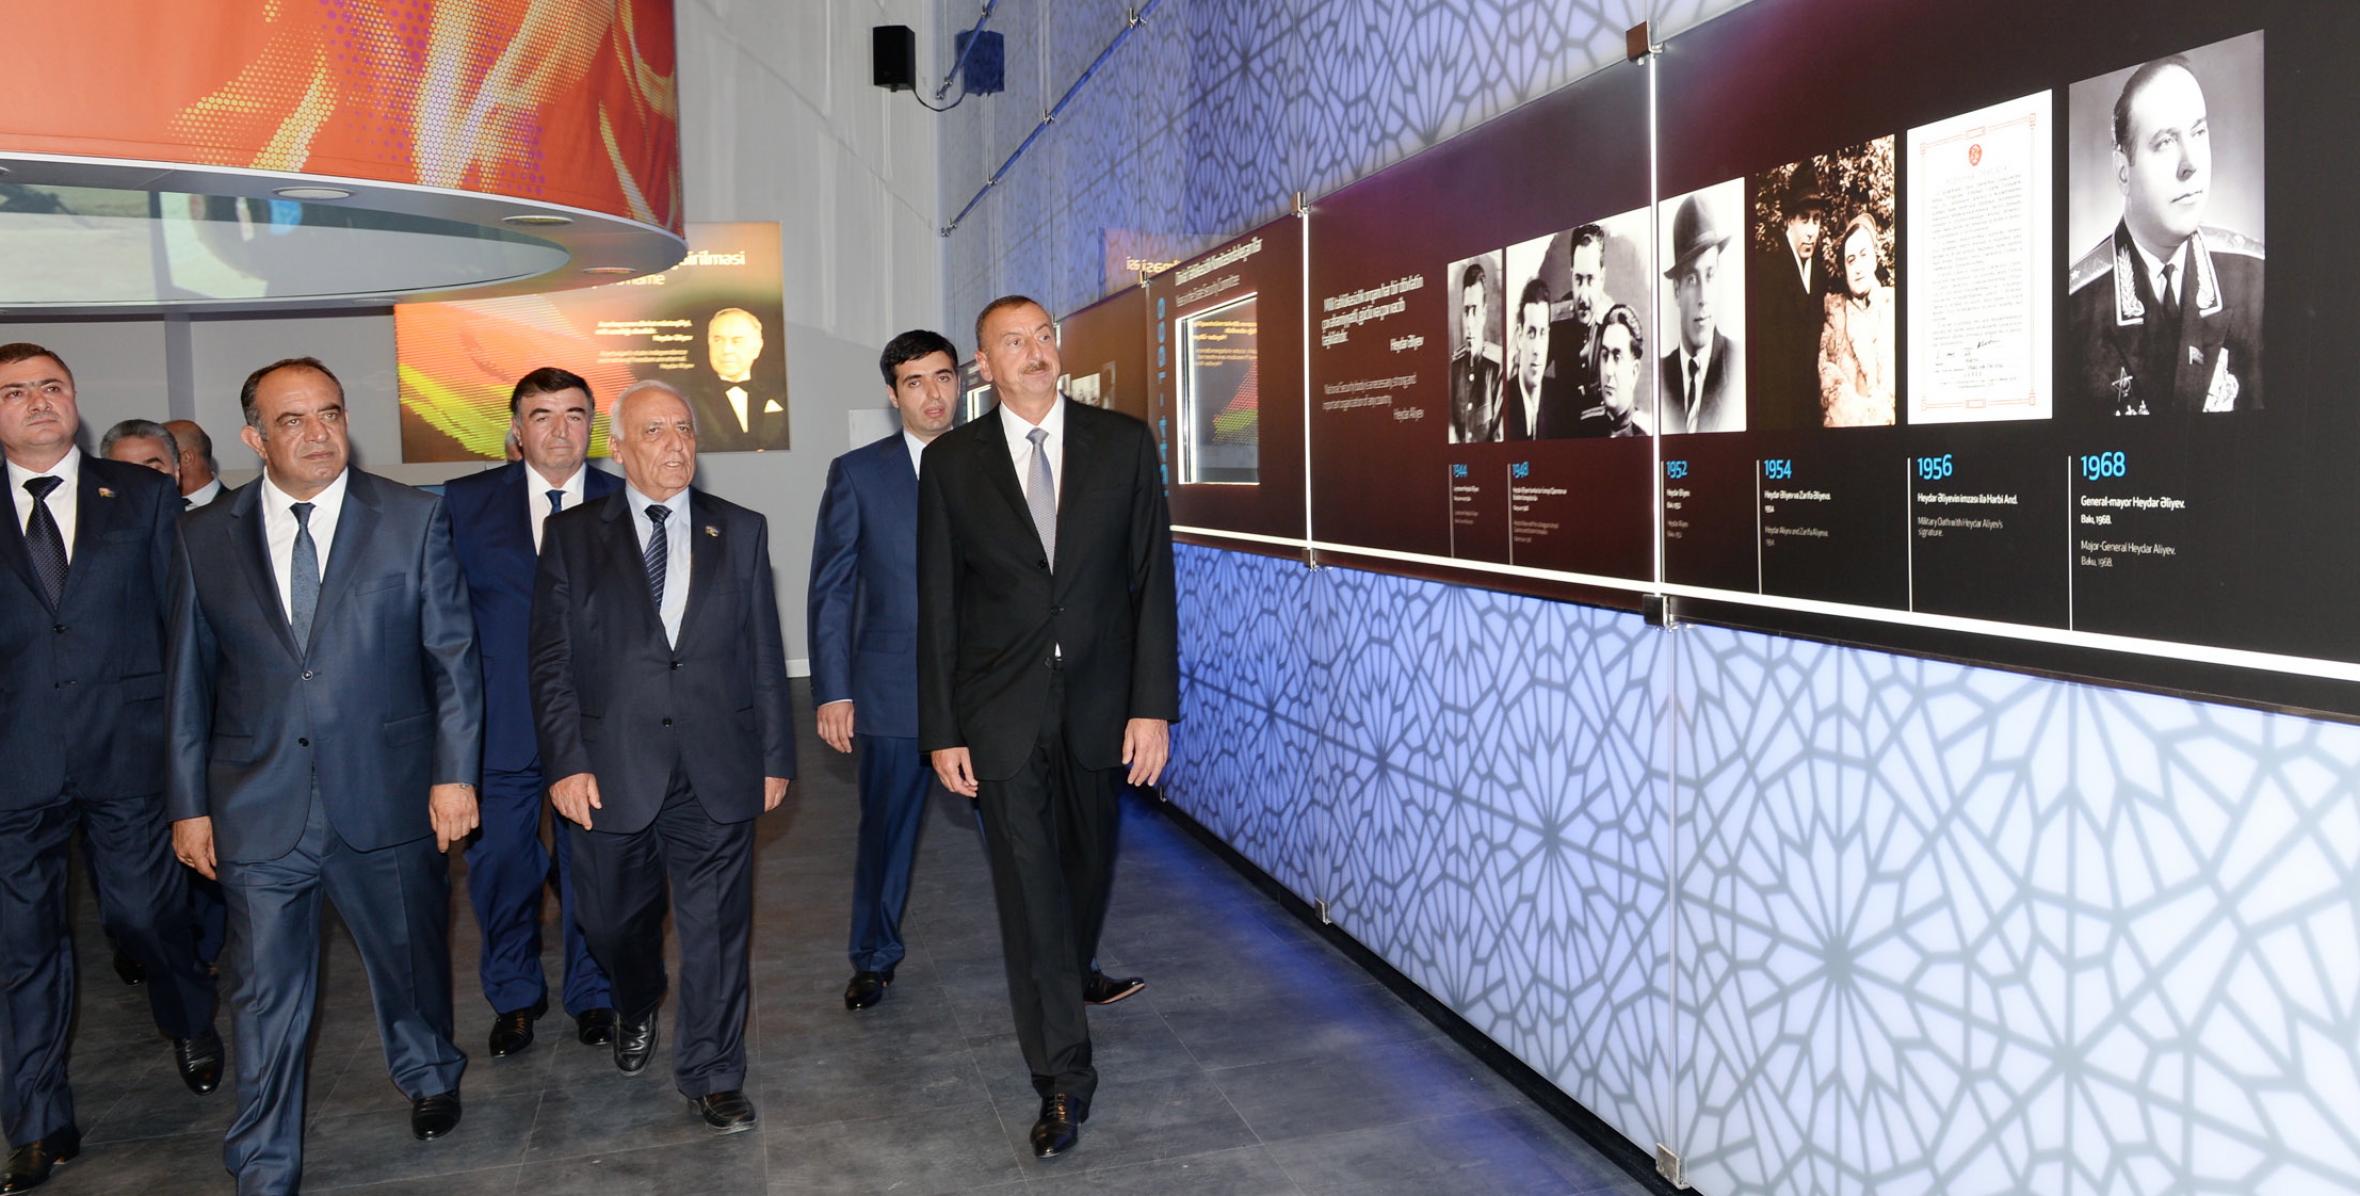 As part of a visit to Gakh, Ilham Aliyev attended the opening of the Heydar Aliyev Center